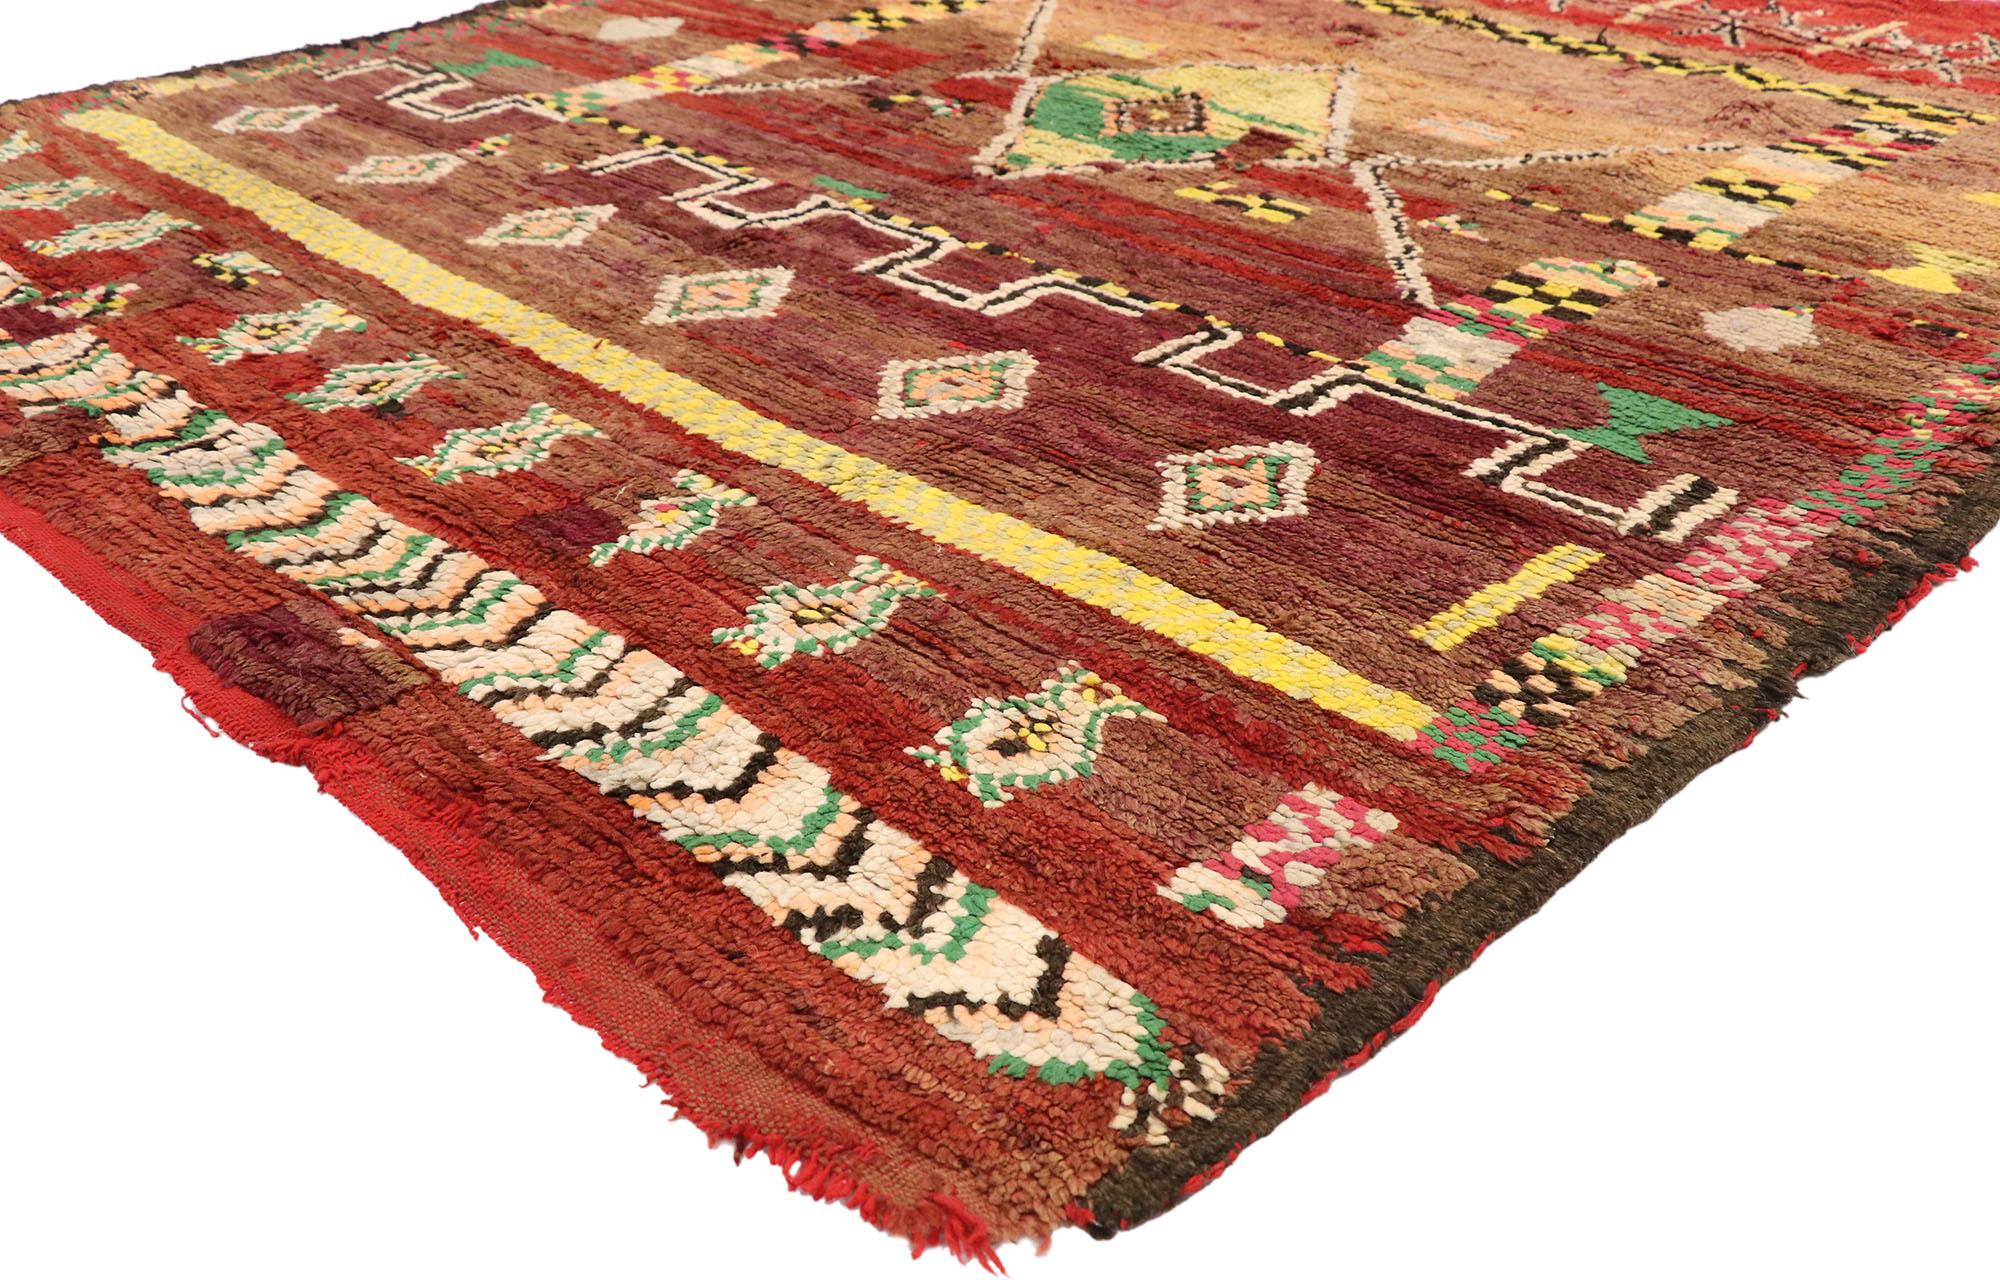 20969, vintage Berber Moroccan rug with Tribal Artisan style. This hand knotted wool vintage Berber Moroccan rug features an abrashed field covered with various ambiguous tribal symbols that carry great meaning in Ancient Berber culture. The tribal